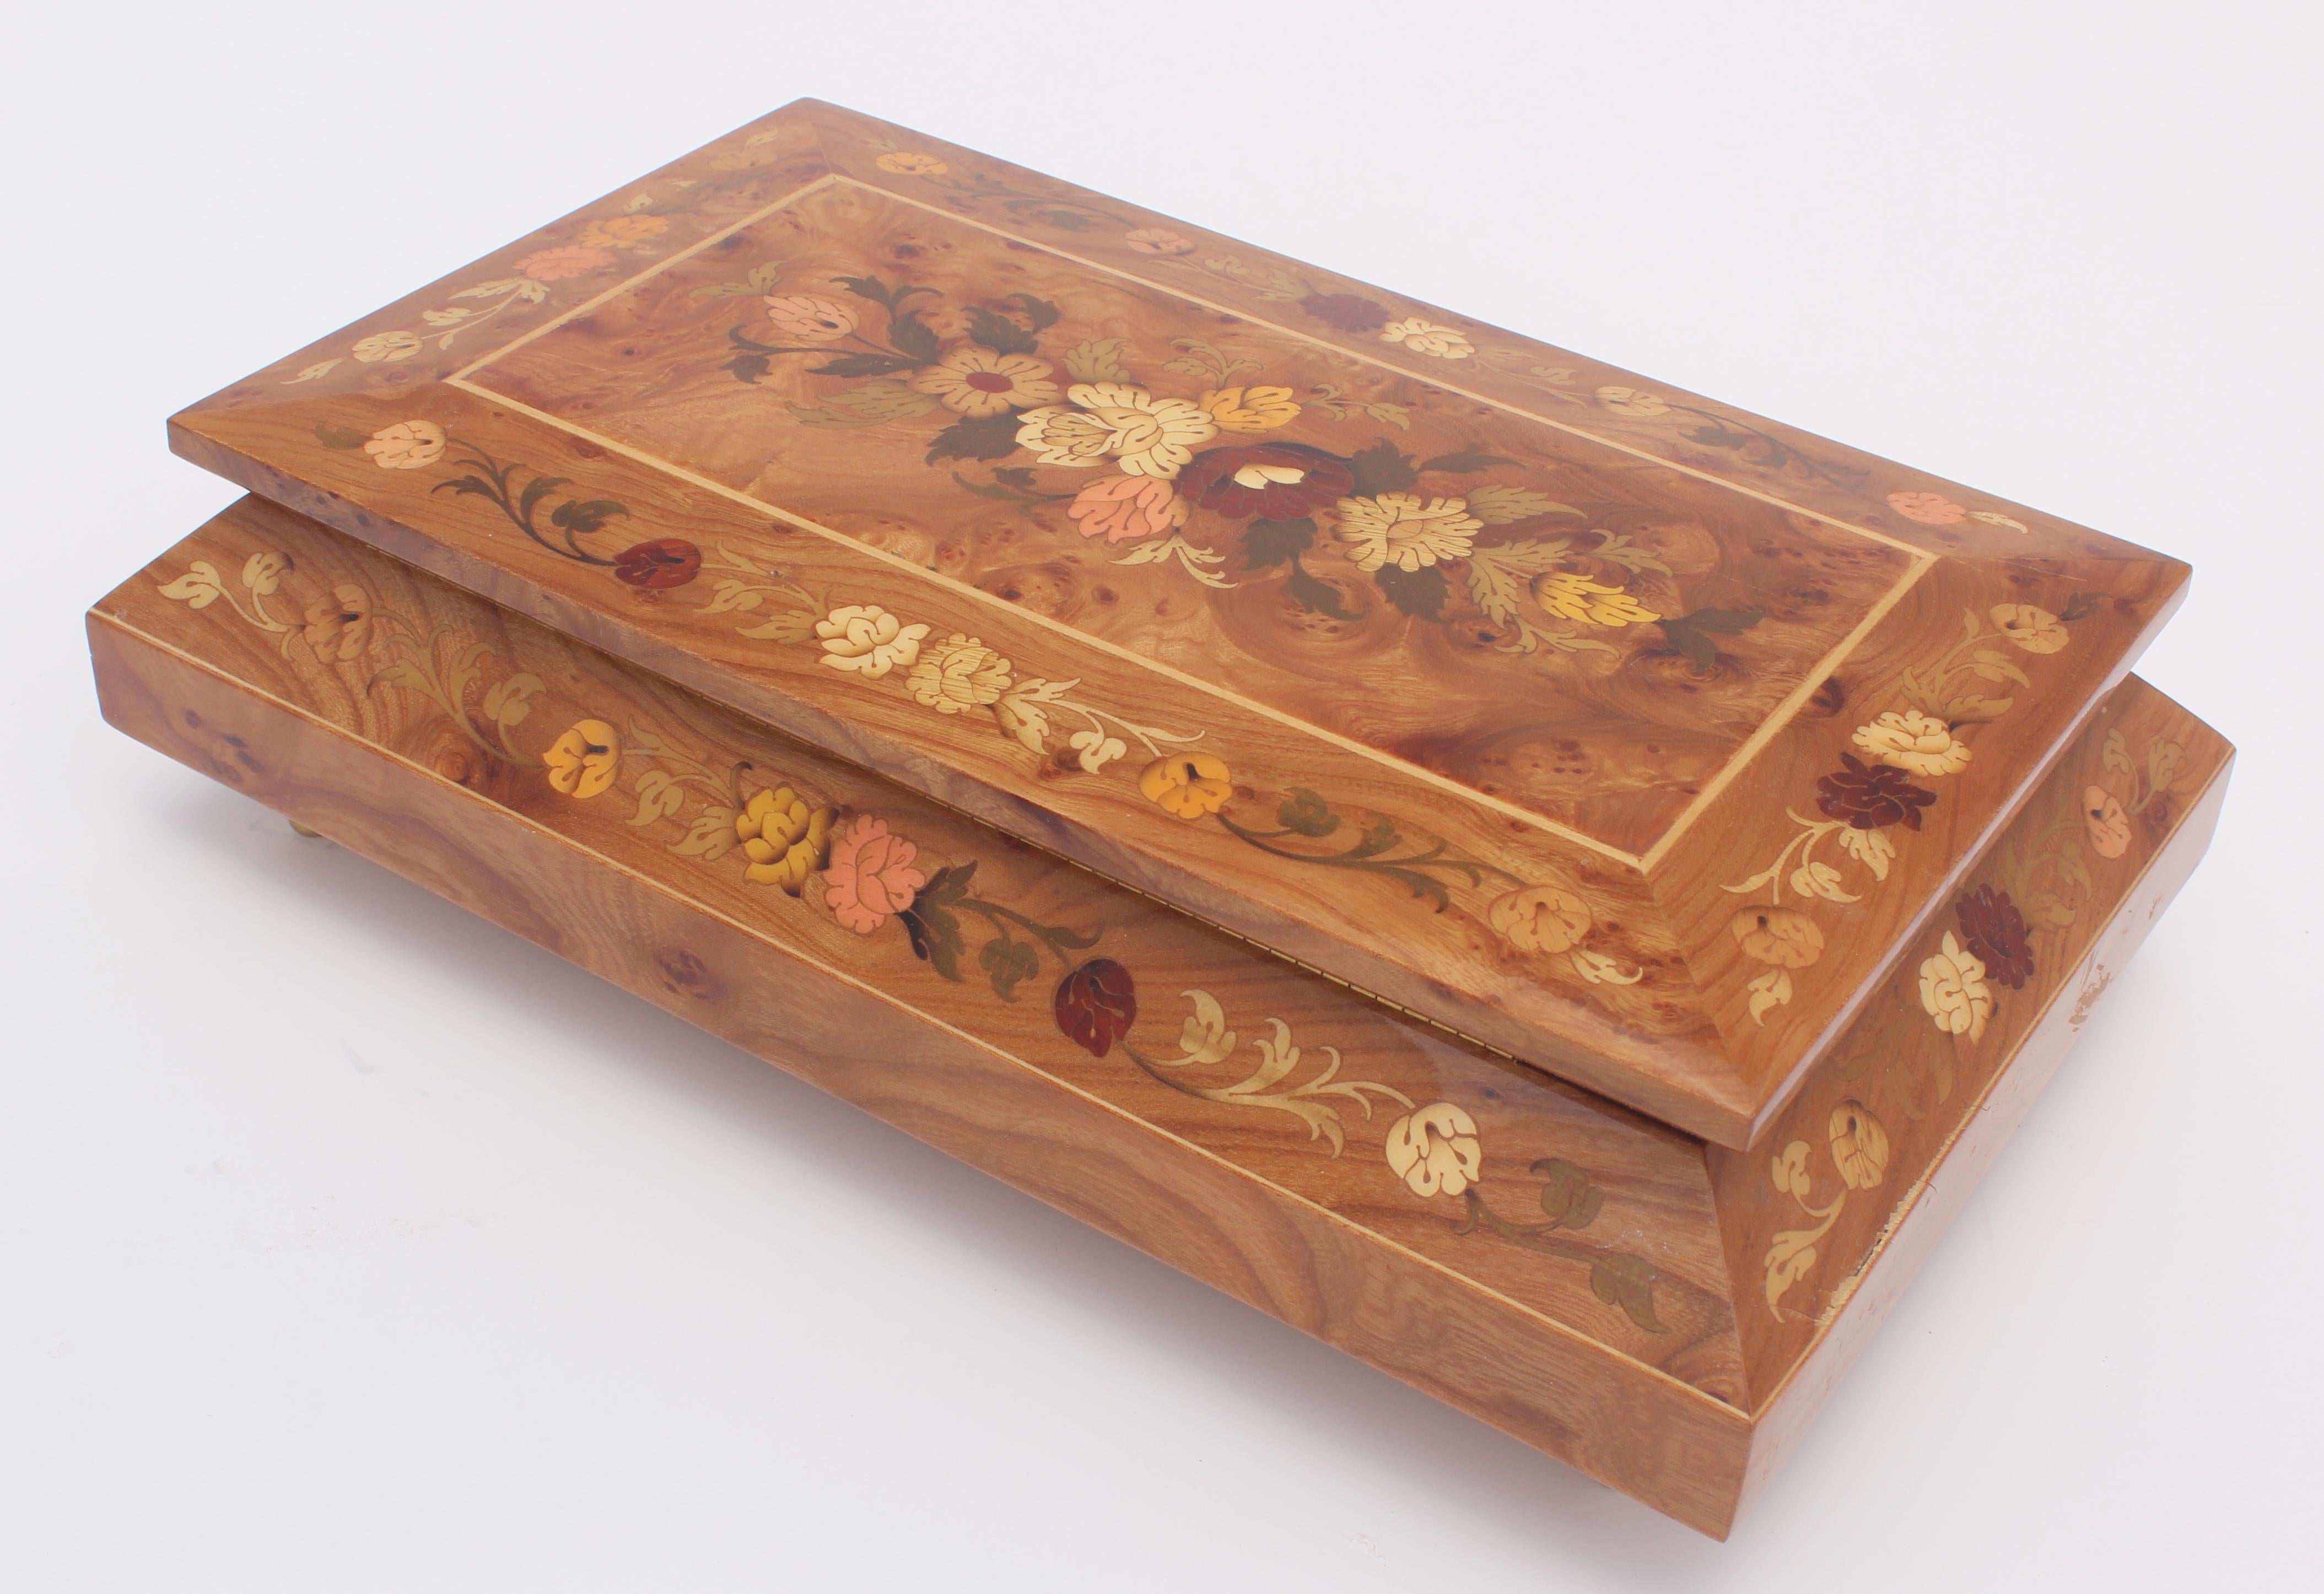 Elegant large footed wooden music box with top finely hand painted with foliages.
Upon opening, the music box begins to play 